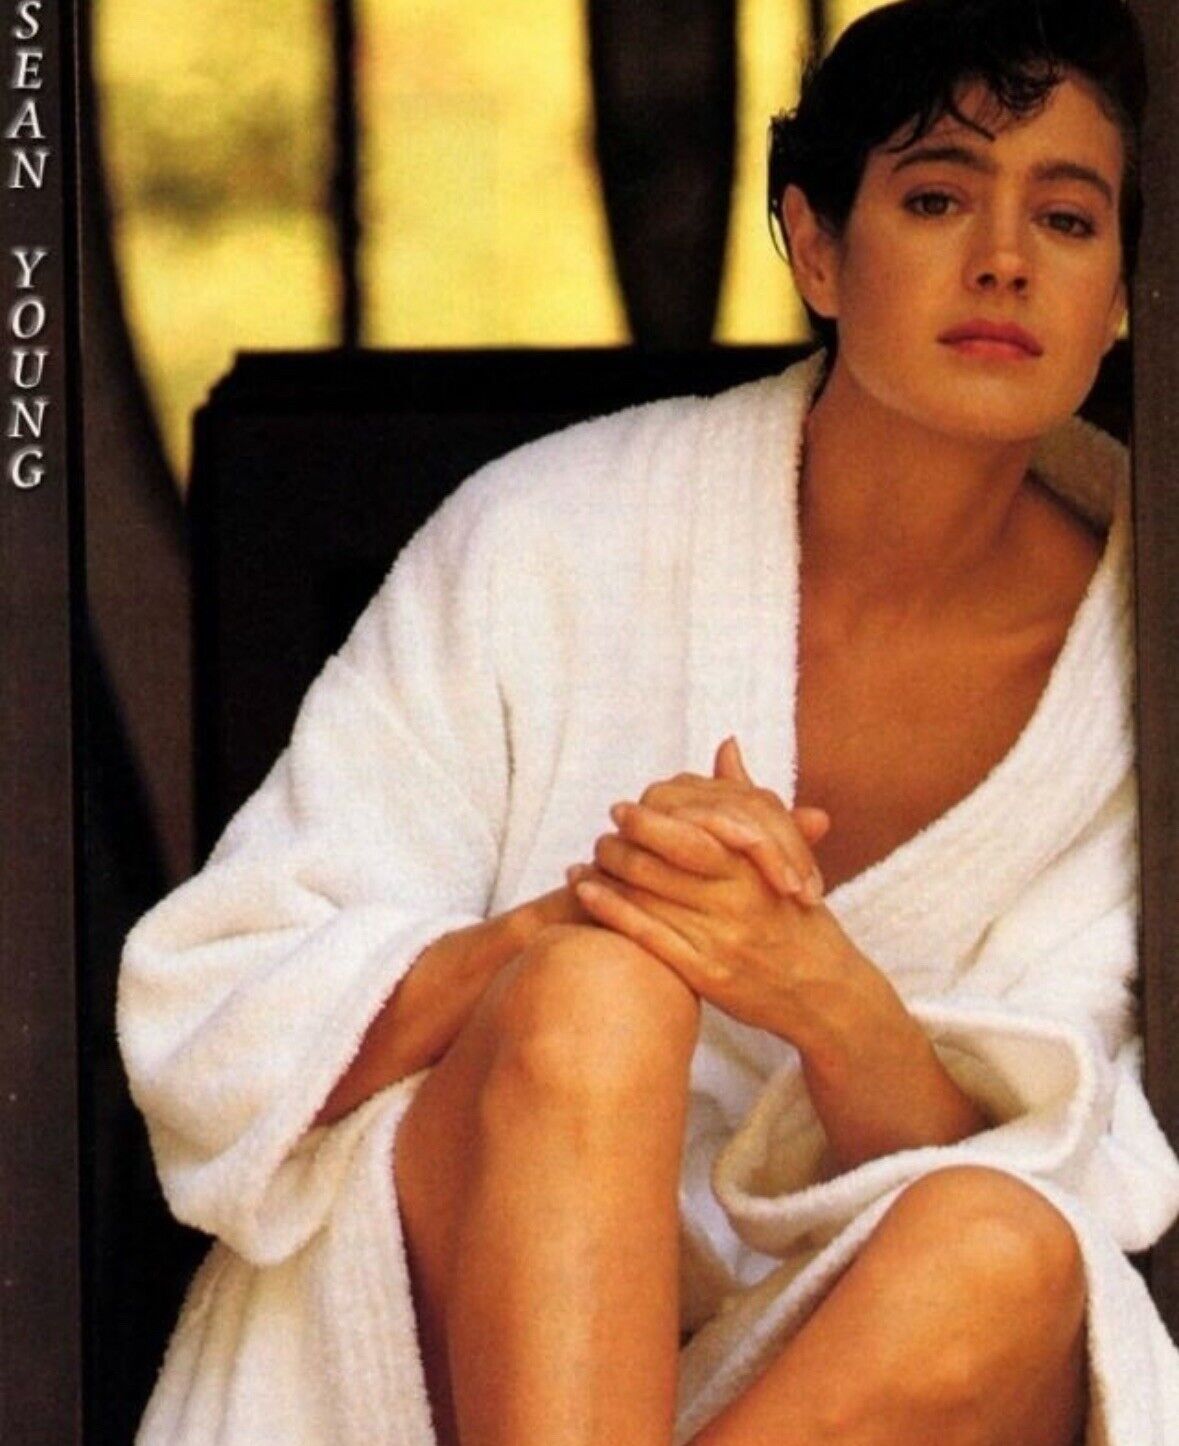 SEAN YOUNG - JUST CASUAL 